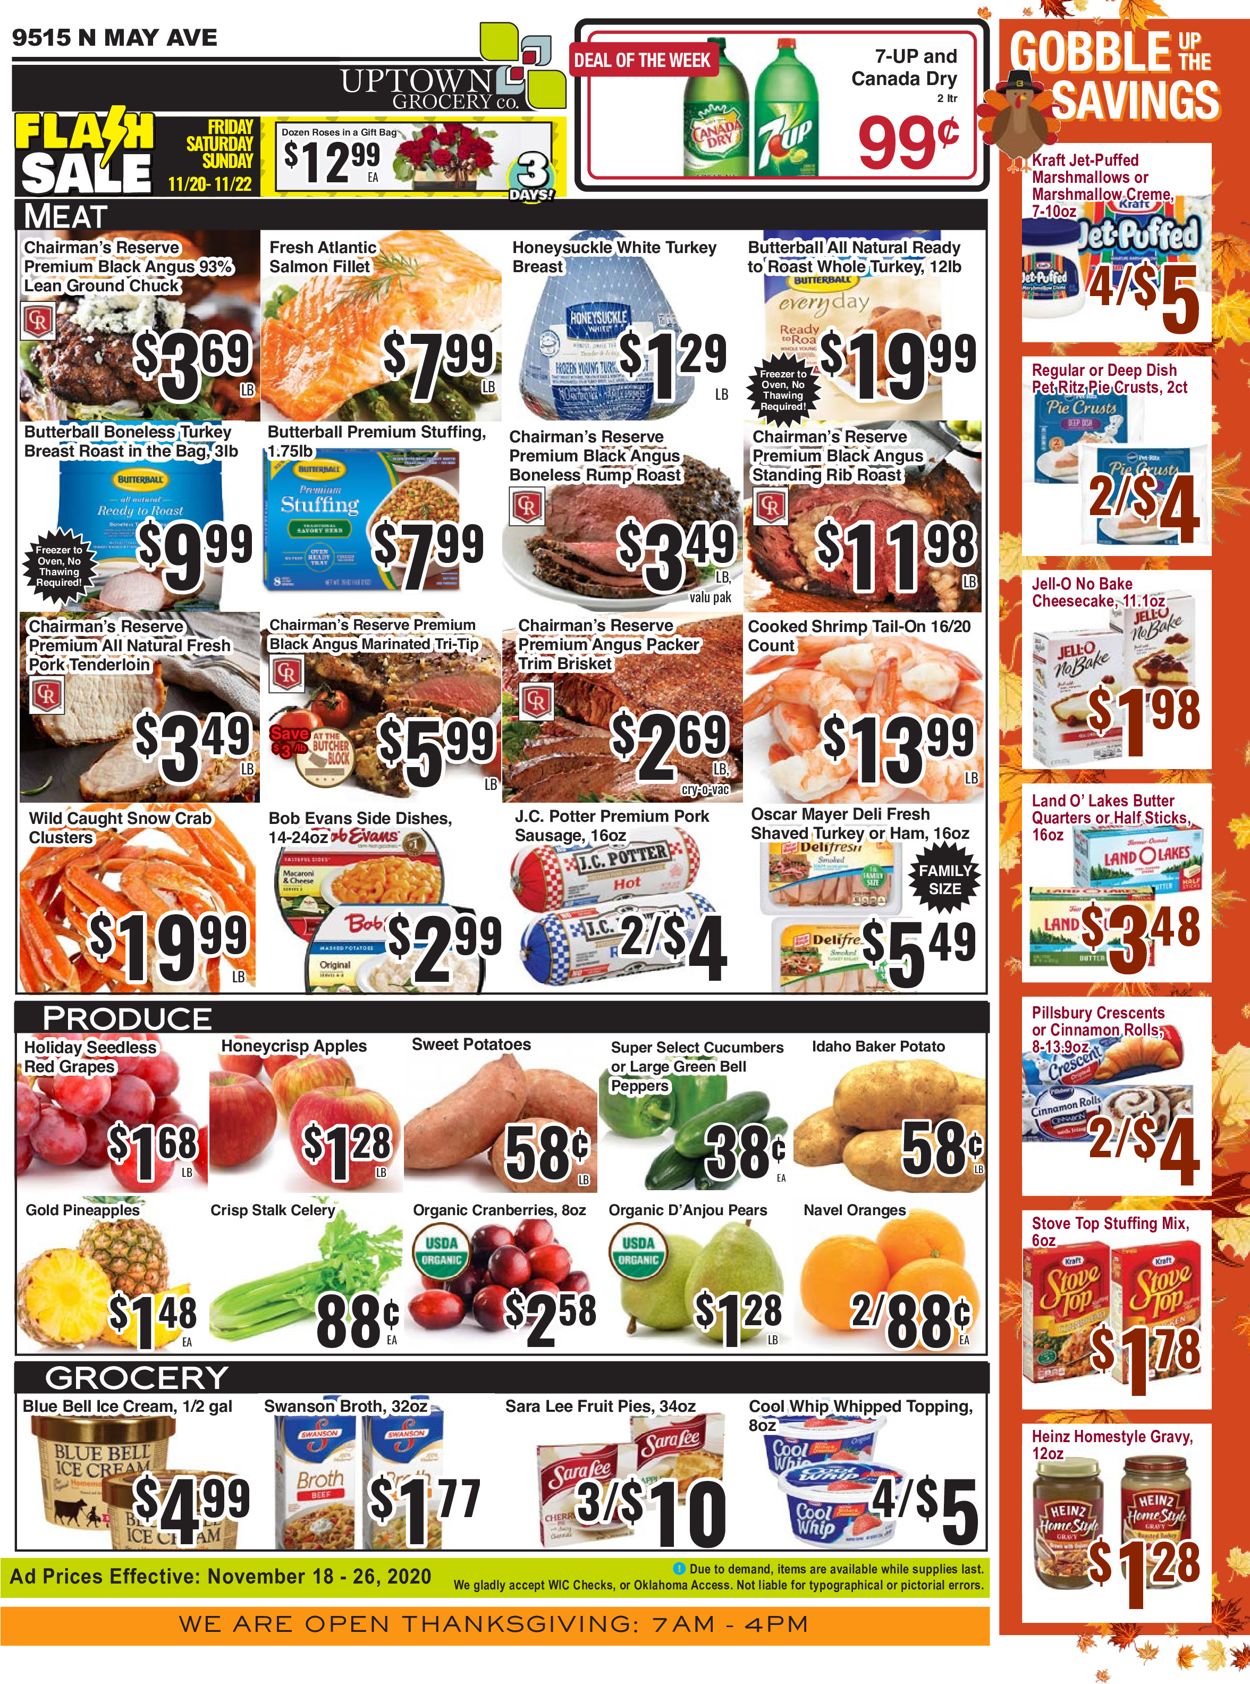 Uptown Grocery Co. Weekly Ad Circular - valid 11/18-11/26/2020